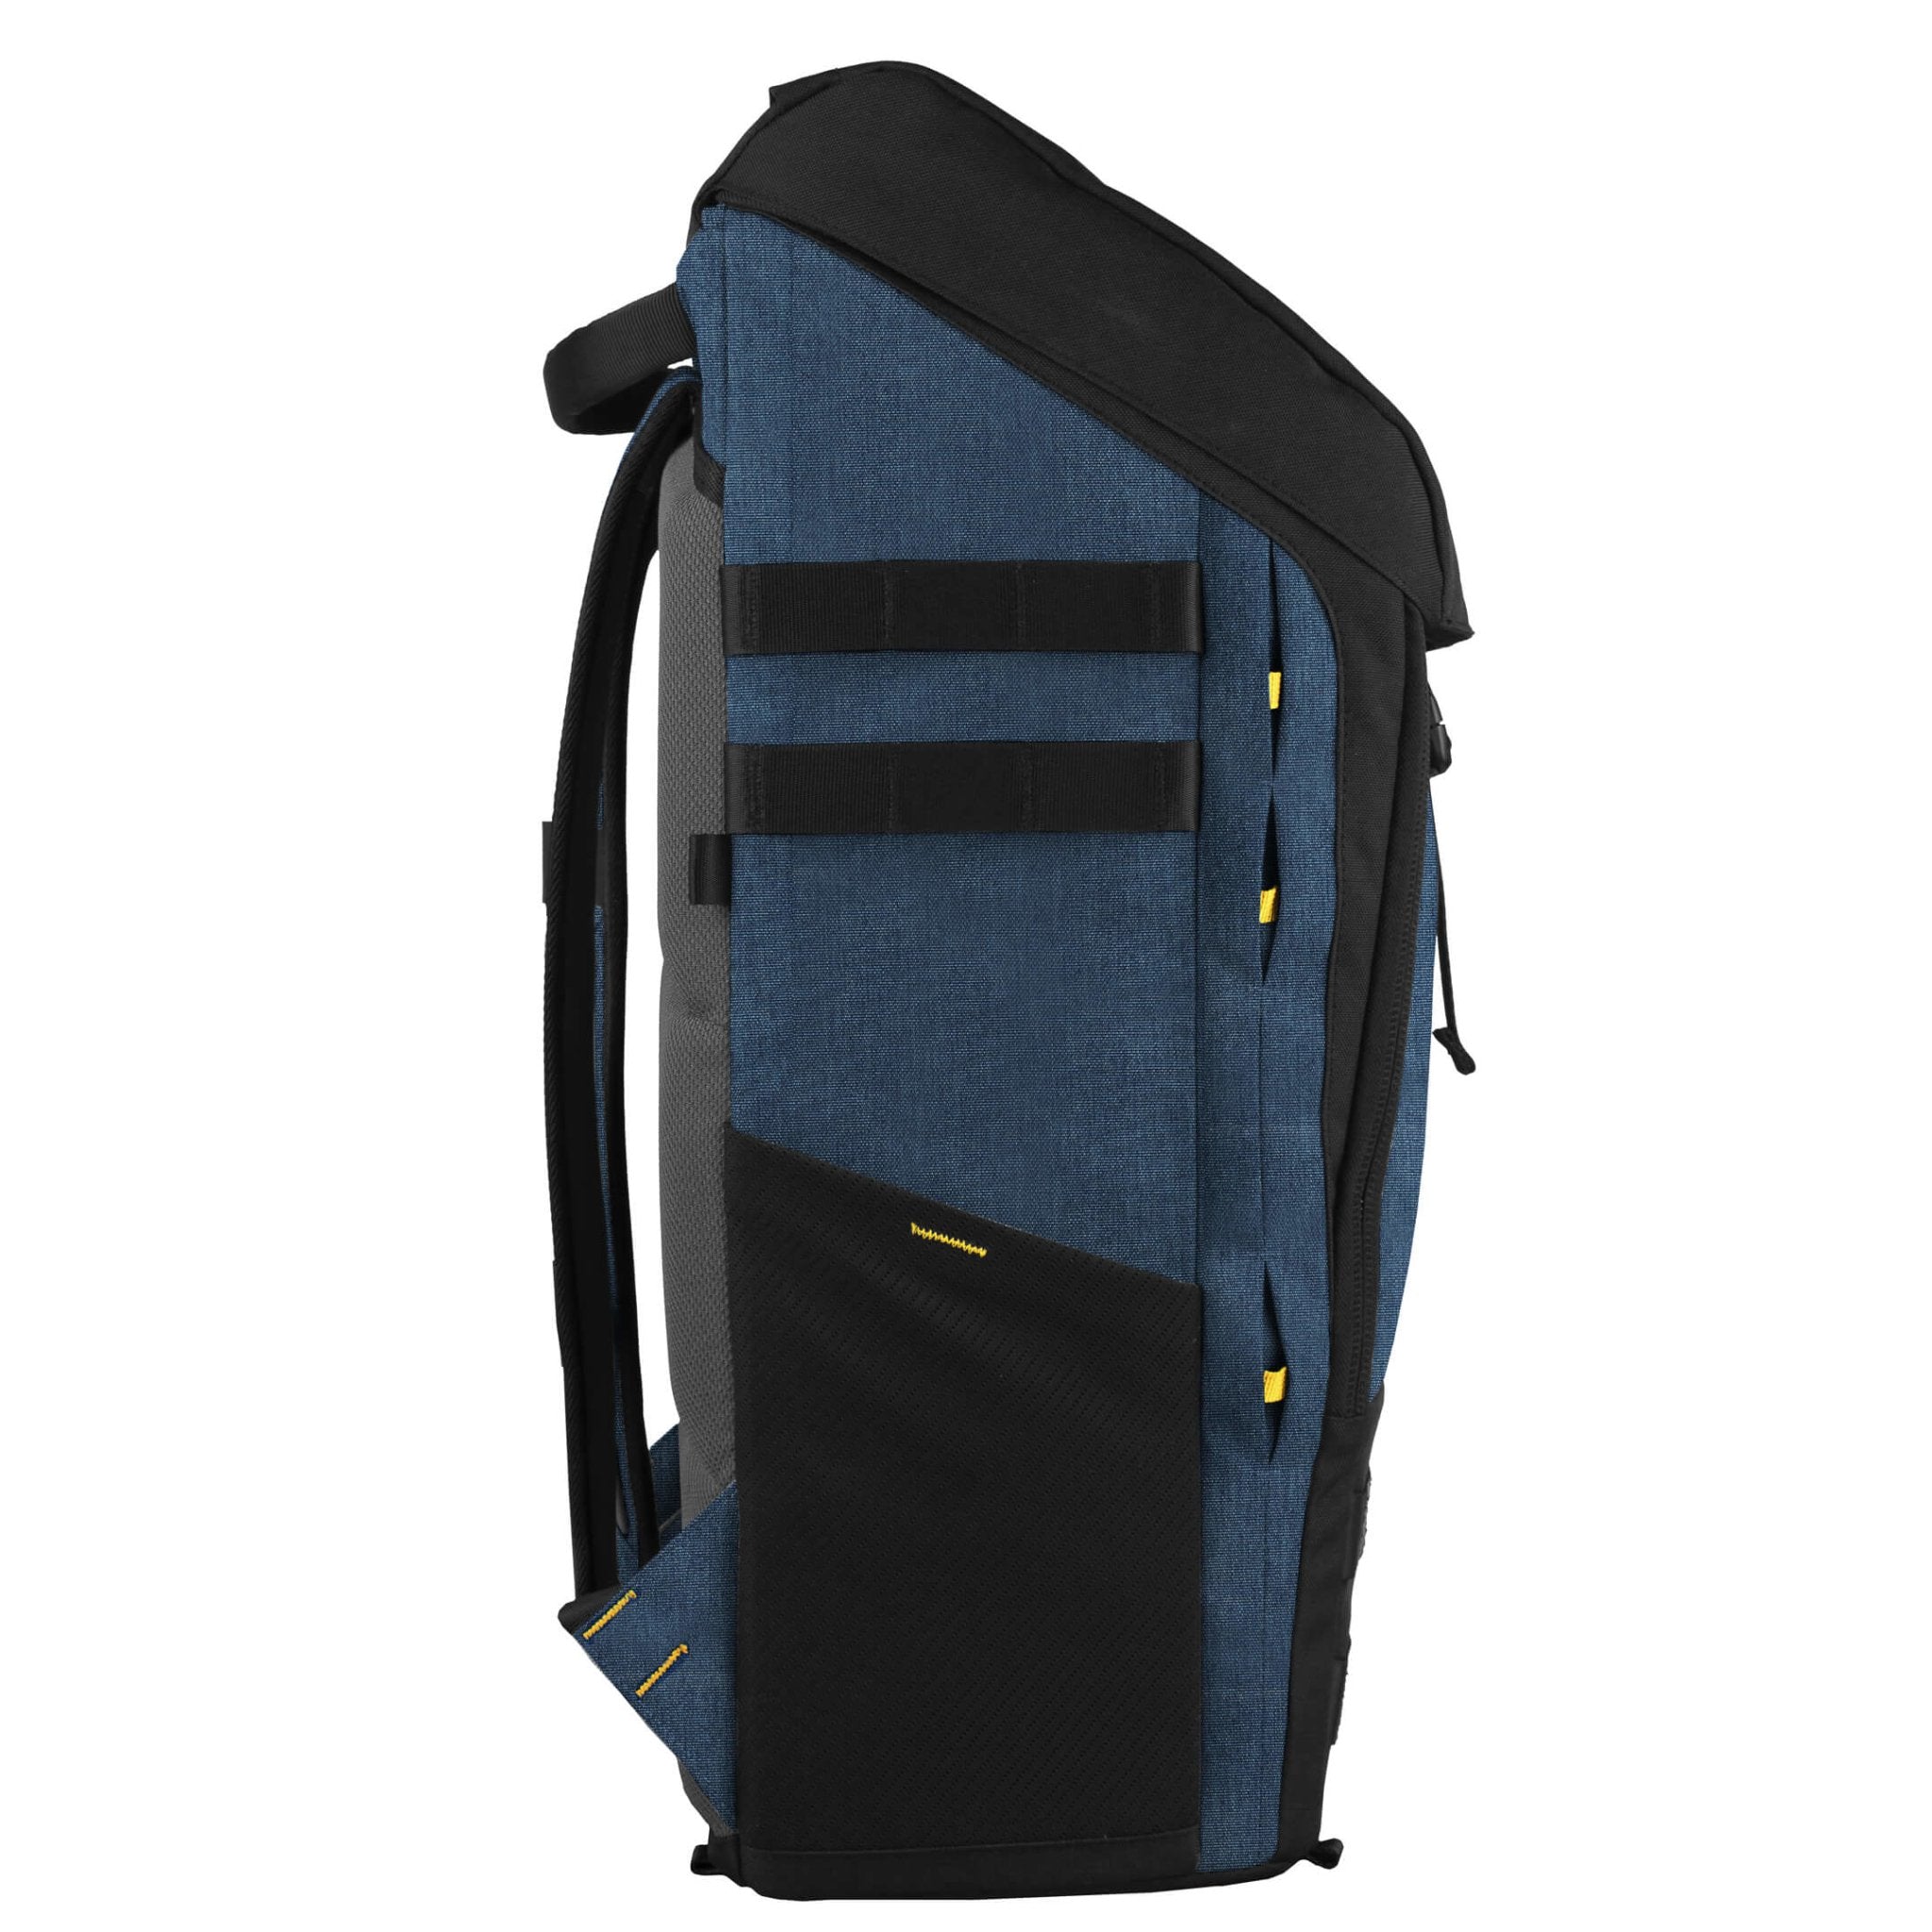 Torvol Urban Carrier Backpack - Your All-Round Freestyle Backpack 11 - Torvol - Drone Authority